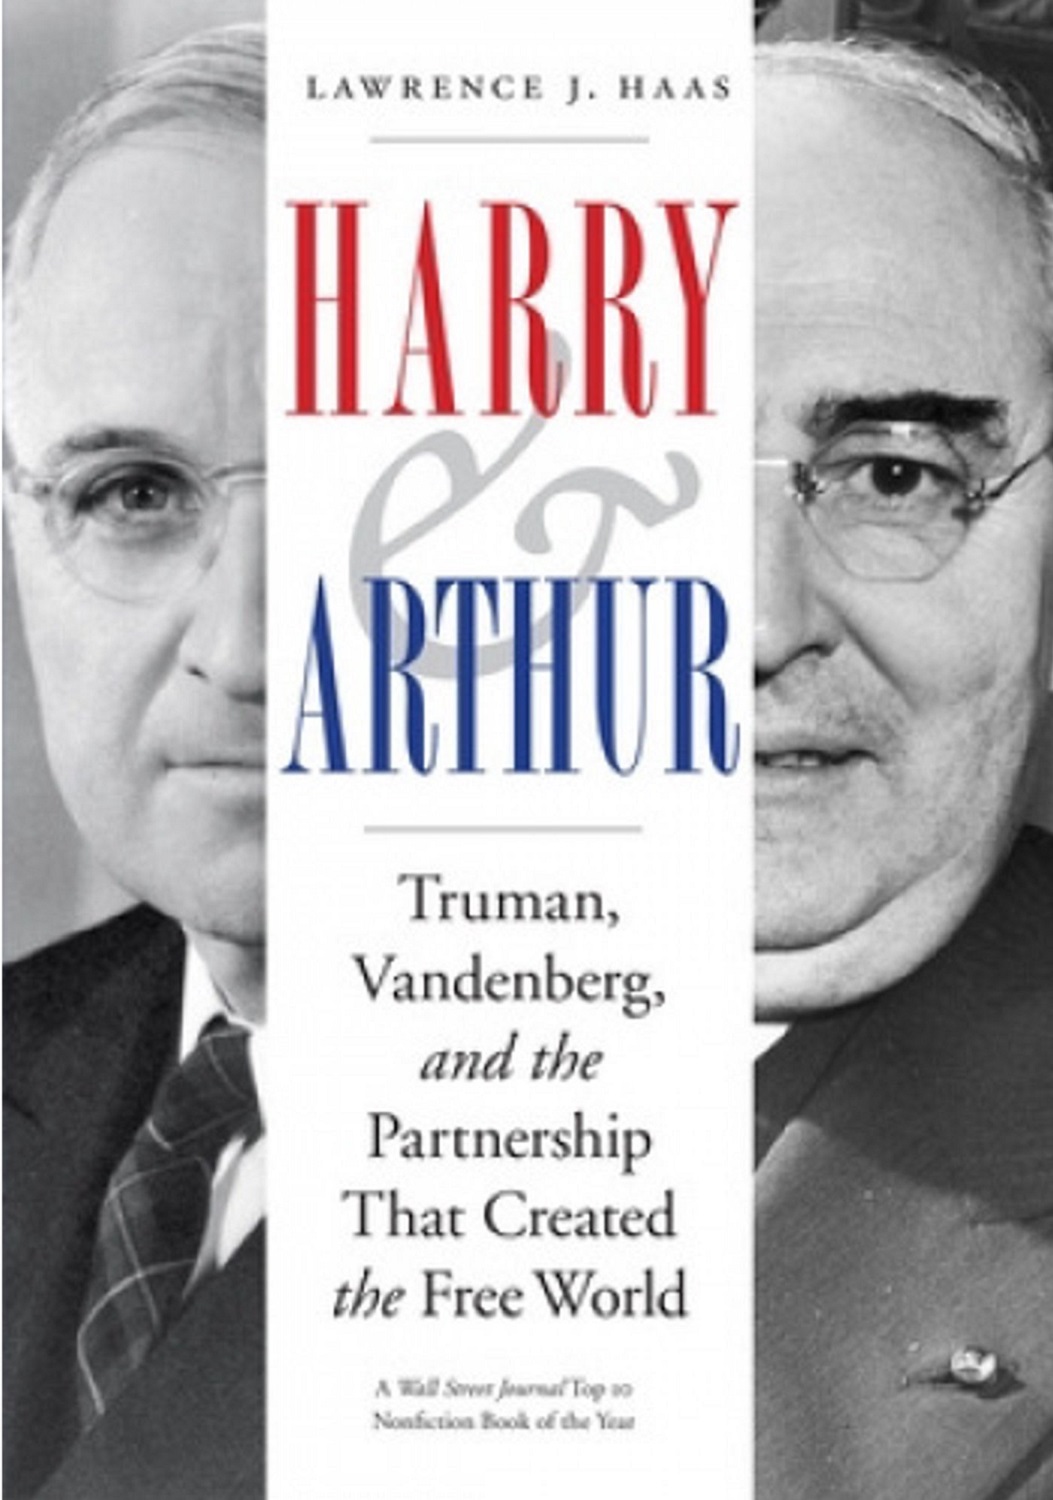 Harry and Arthur by Lawrence Haas